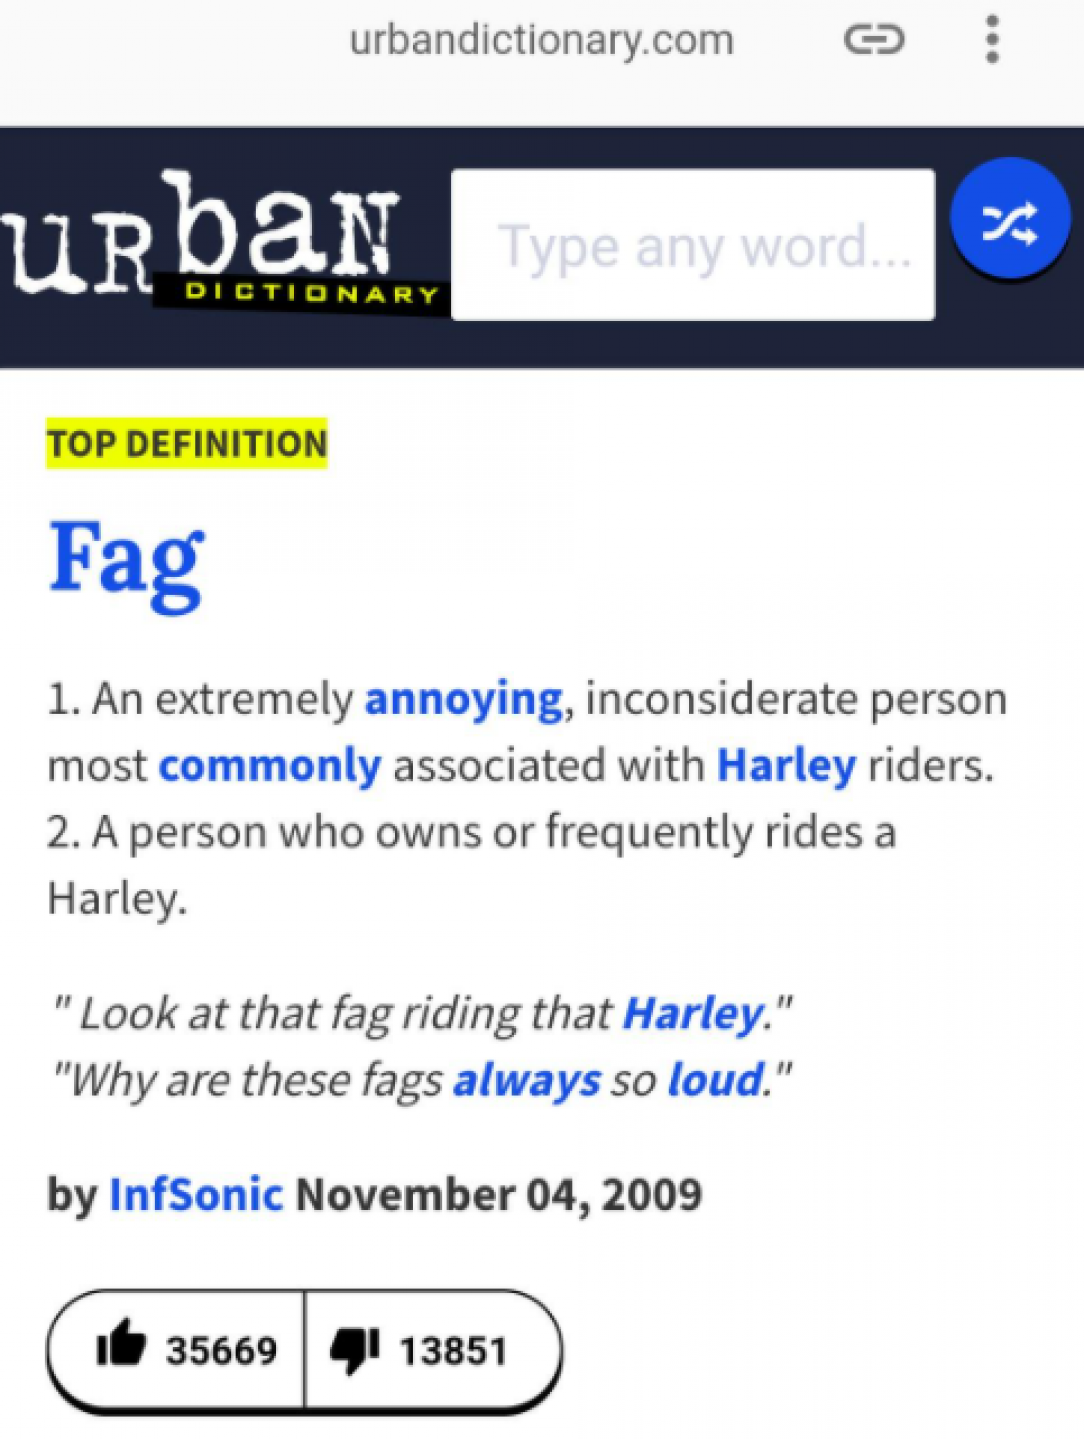 Urban Dictionary knows what fag means